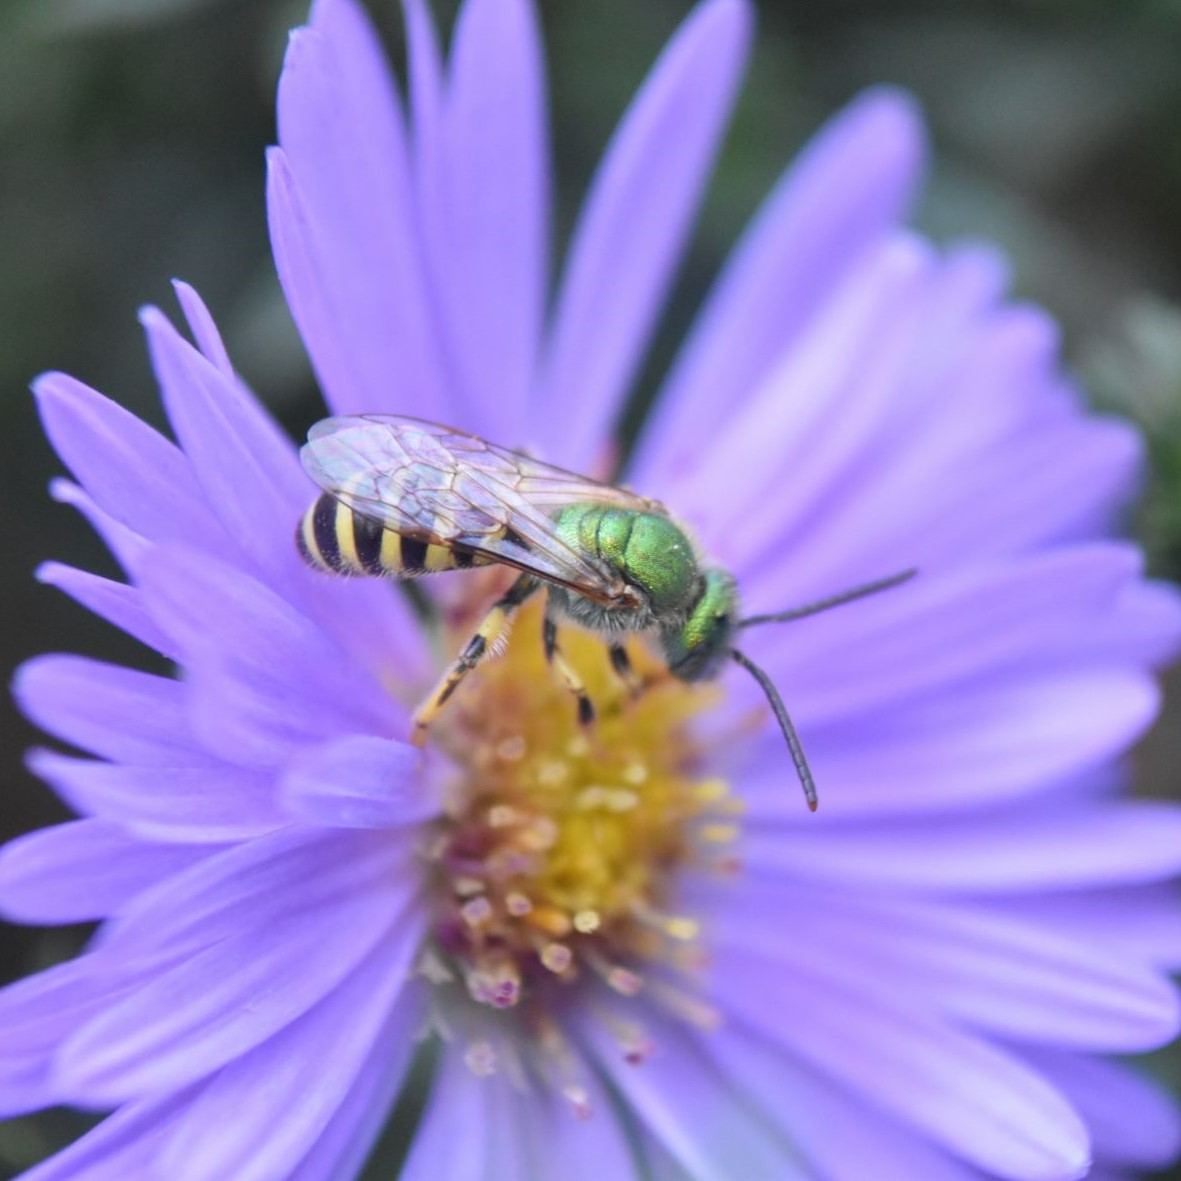 Agapostemon male bee on a New England aster flower